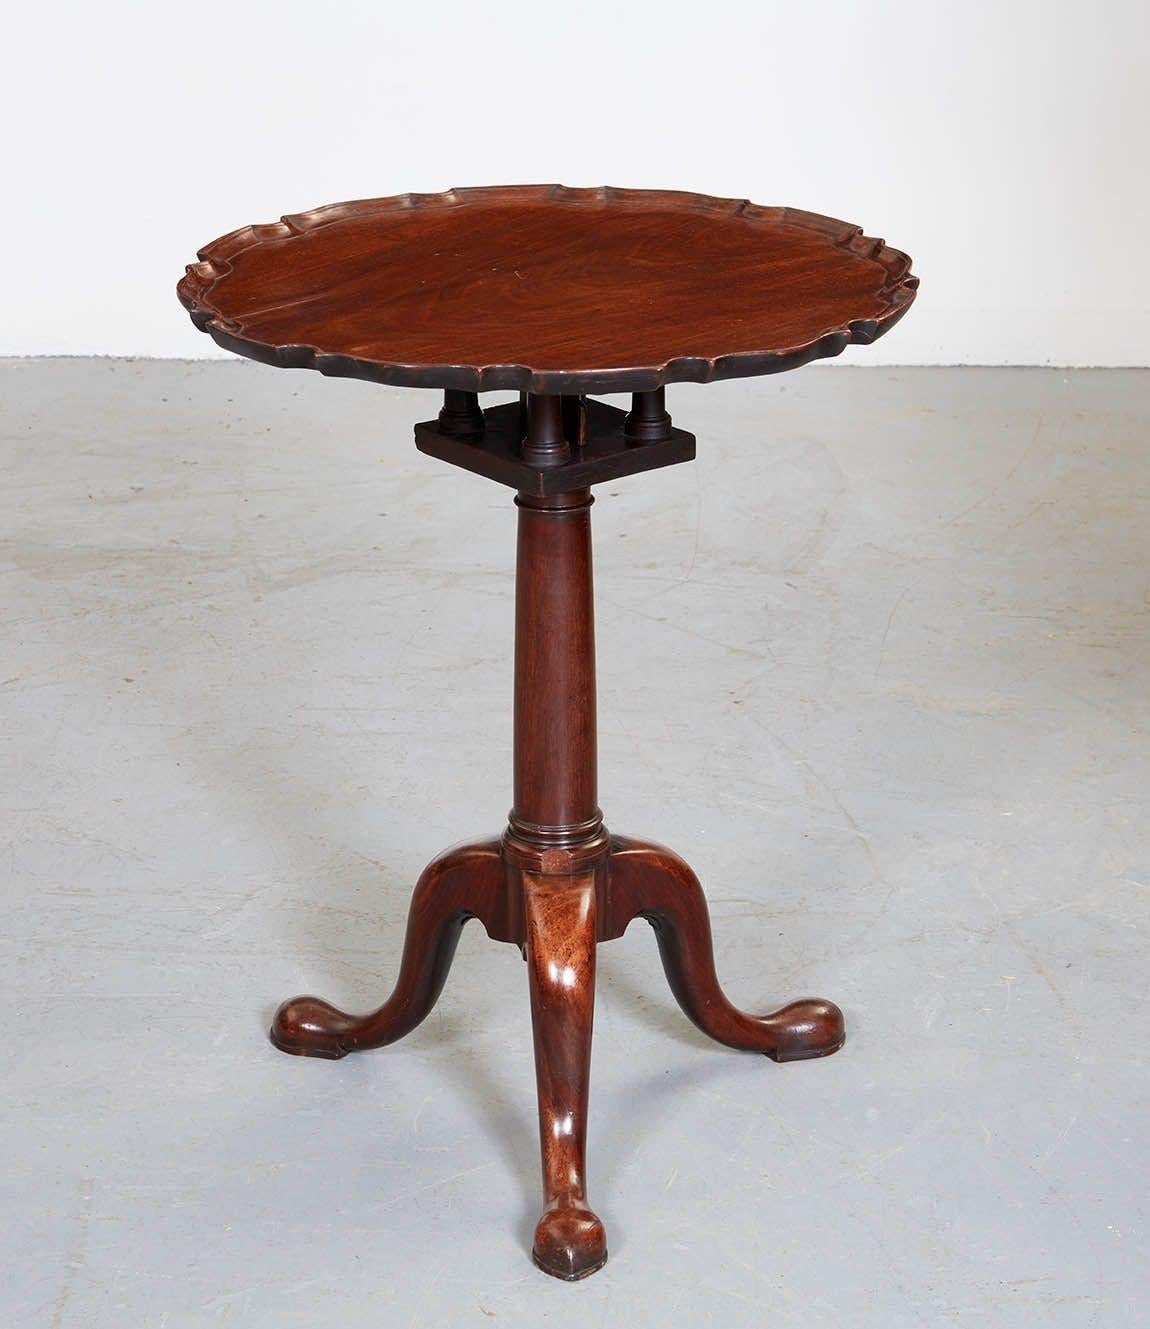 Fine George II mahogany pie crust tea table, the well-figured scalloped and dished top over original birdcage tilt mechanism, on cannon-barrel turned shaft and standing on graceful slipper fee, the whole with good rich color and patination.